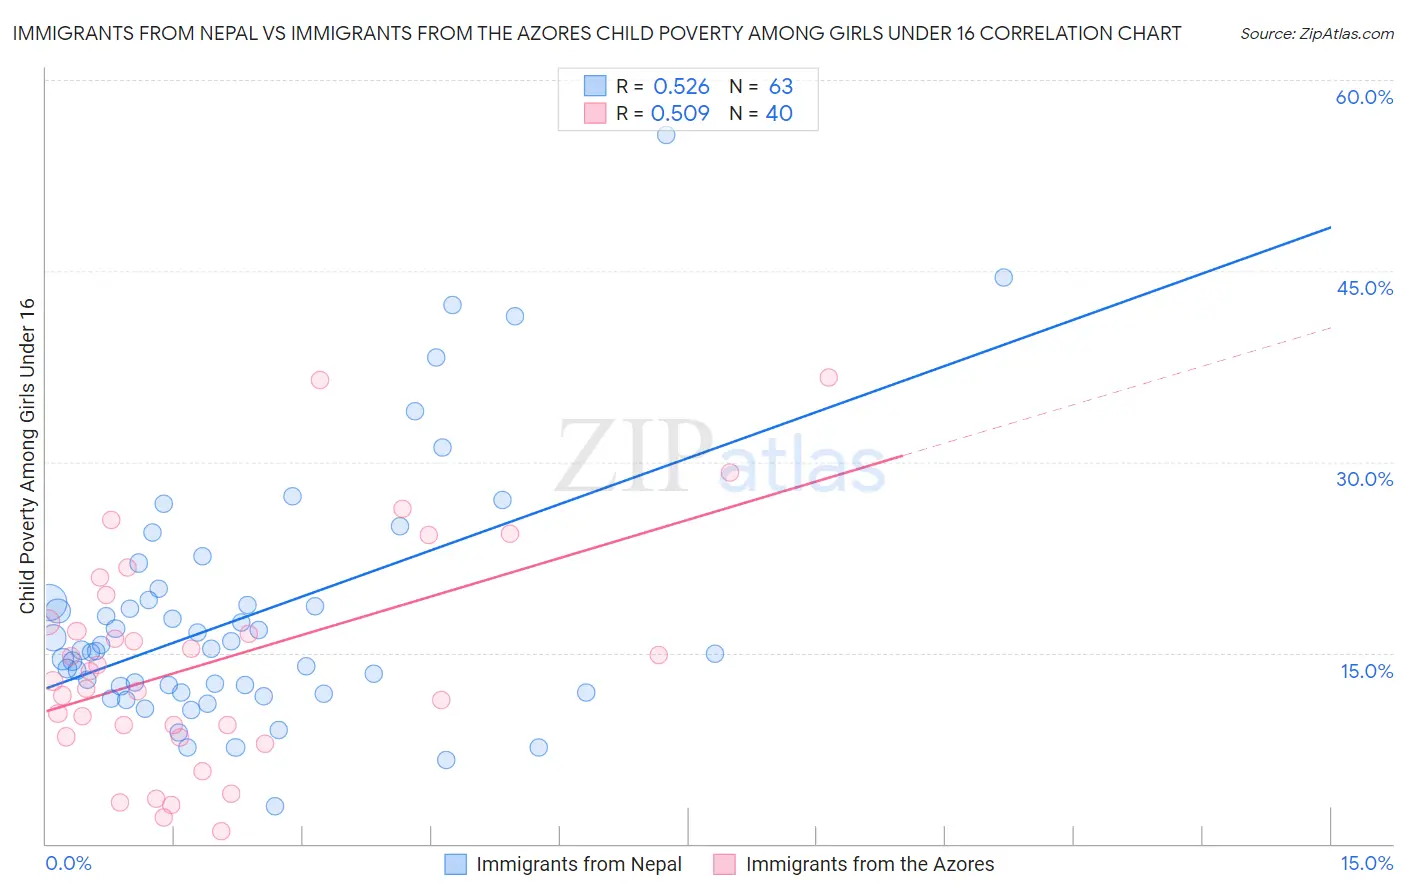 Immigrants from Nepal vs Immigrants from the Azores Child Poverty Among Girls Under 16